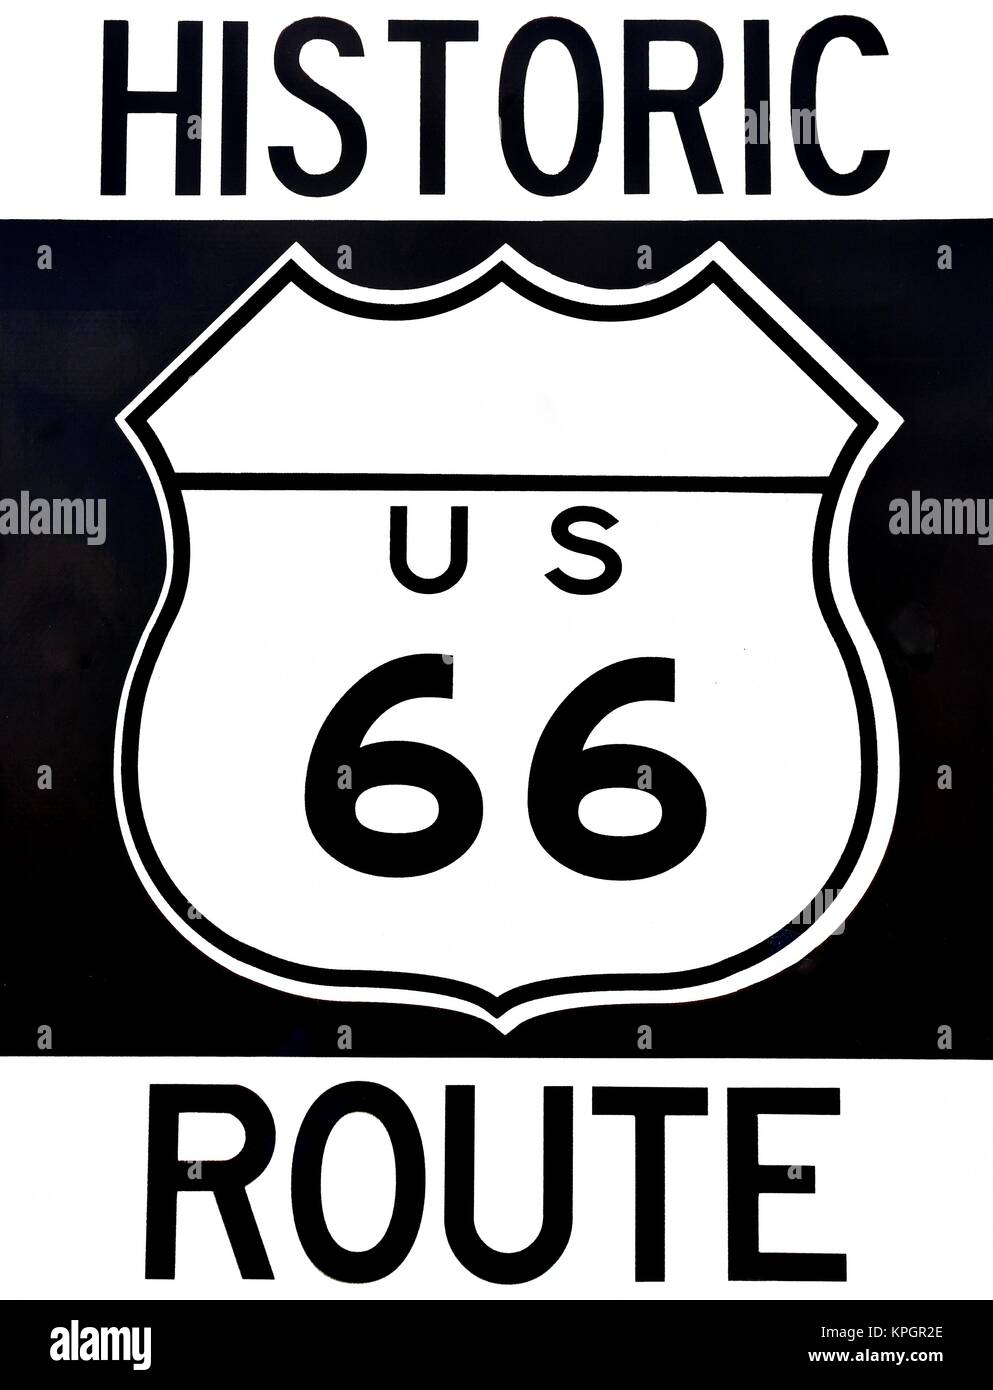 Old historic Route 66 sign with the legend US 66. Stock Photo